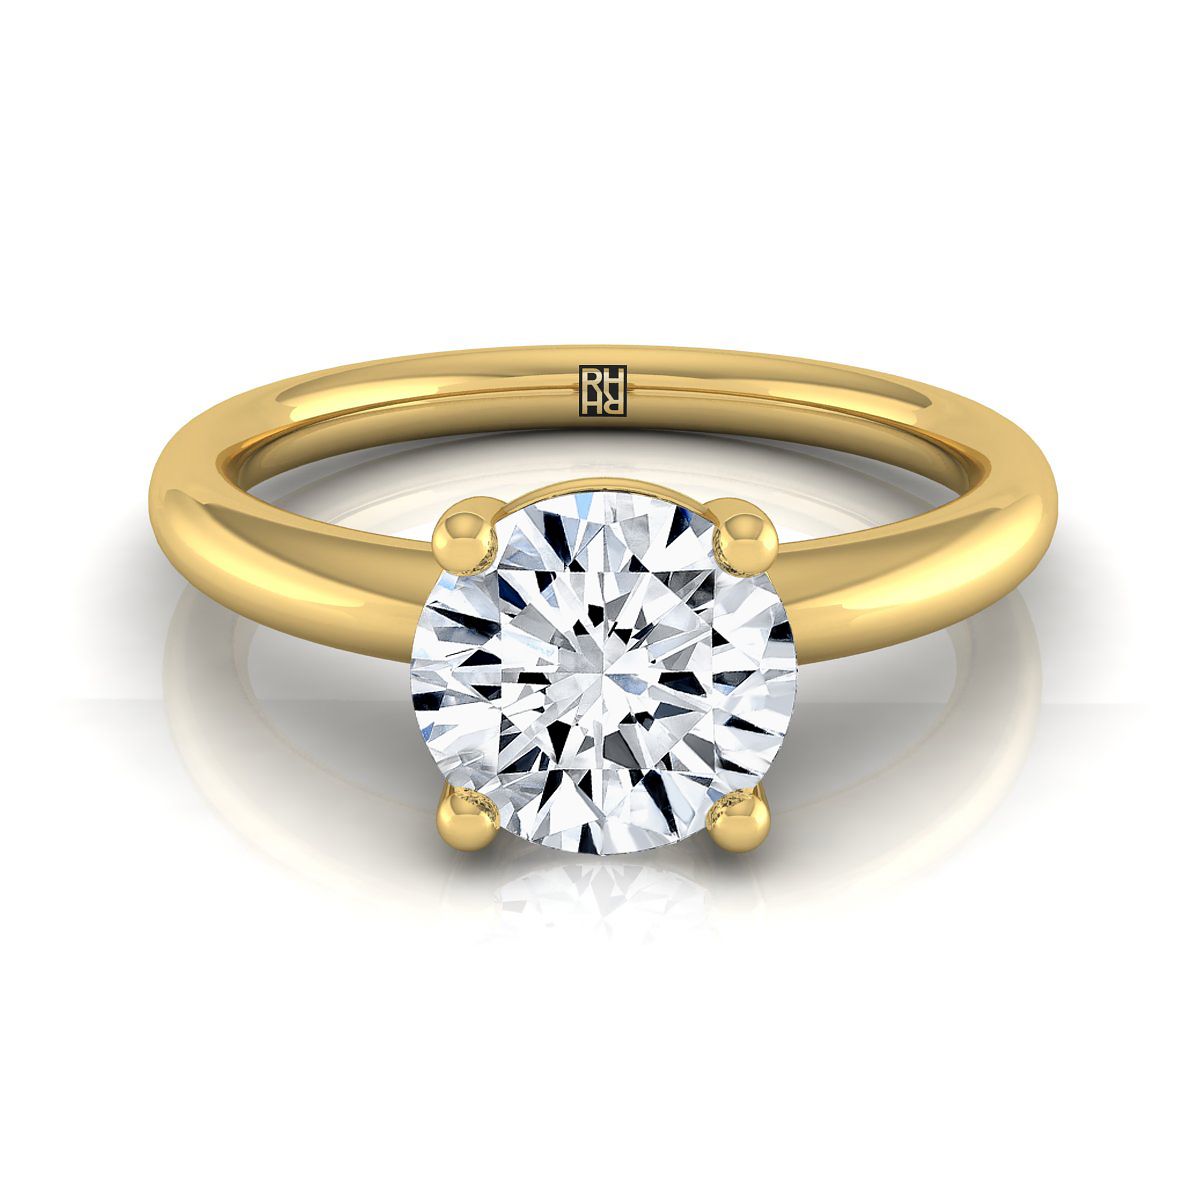 14K Yellow Gold Round Brilliant Rounded Comfort Fit Solitaire Engagement Ring